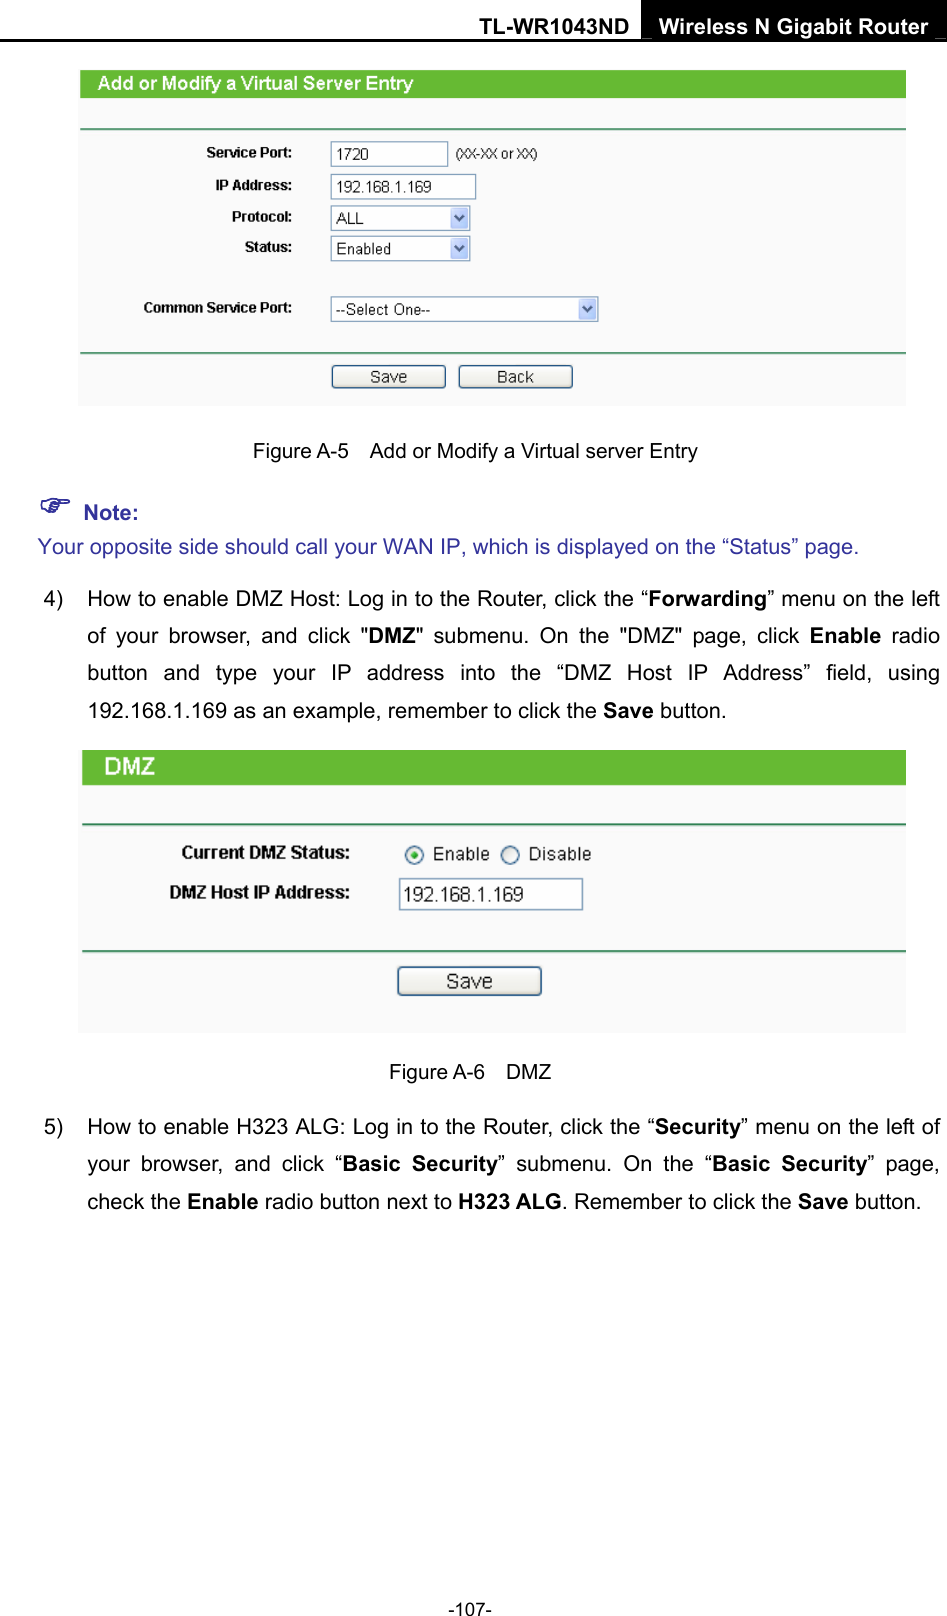 TL-WR1043ND Wireless N Gigabit Router  -107-   Figure A-5    Add or Modify a Virtual server Entry ) Note: Your opposite side should call your WAN IP, which is displayed on the “Status” page. 4)  How to enable DMZ Host: Log in to the Router, click the “Forwarding” menu on the left of your browser, and click &quot;DMZ&quot; submenu. On the &quot;DMZ&quot; page, click Enable radio button and type your IP address into the “DMZ Host IP Address” field, using 192.168.1.169 as an example, remember to click the Save button.    Figure A-6  DMZ 5)  How to enable H323 ALG: Log in to the Router, click the “Security” menu on the left of your browser, and click “Basic Security” submenu. On the “Basic Security” page, check the Enable radio button next to H323 ALG. Remember to click the Save button. 